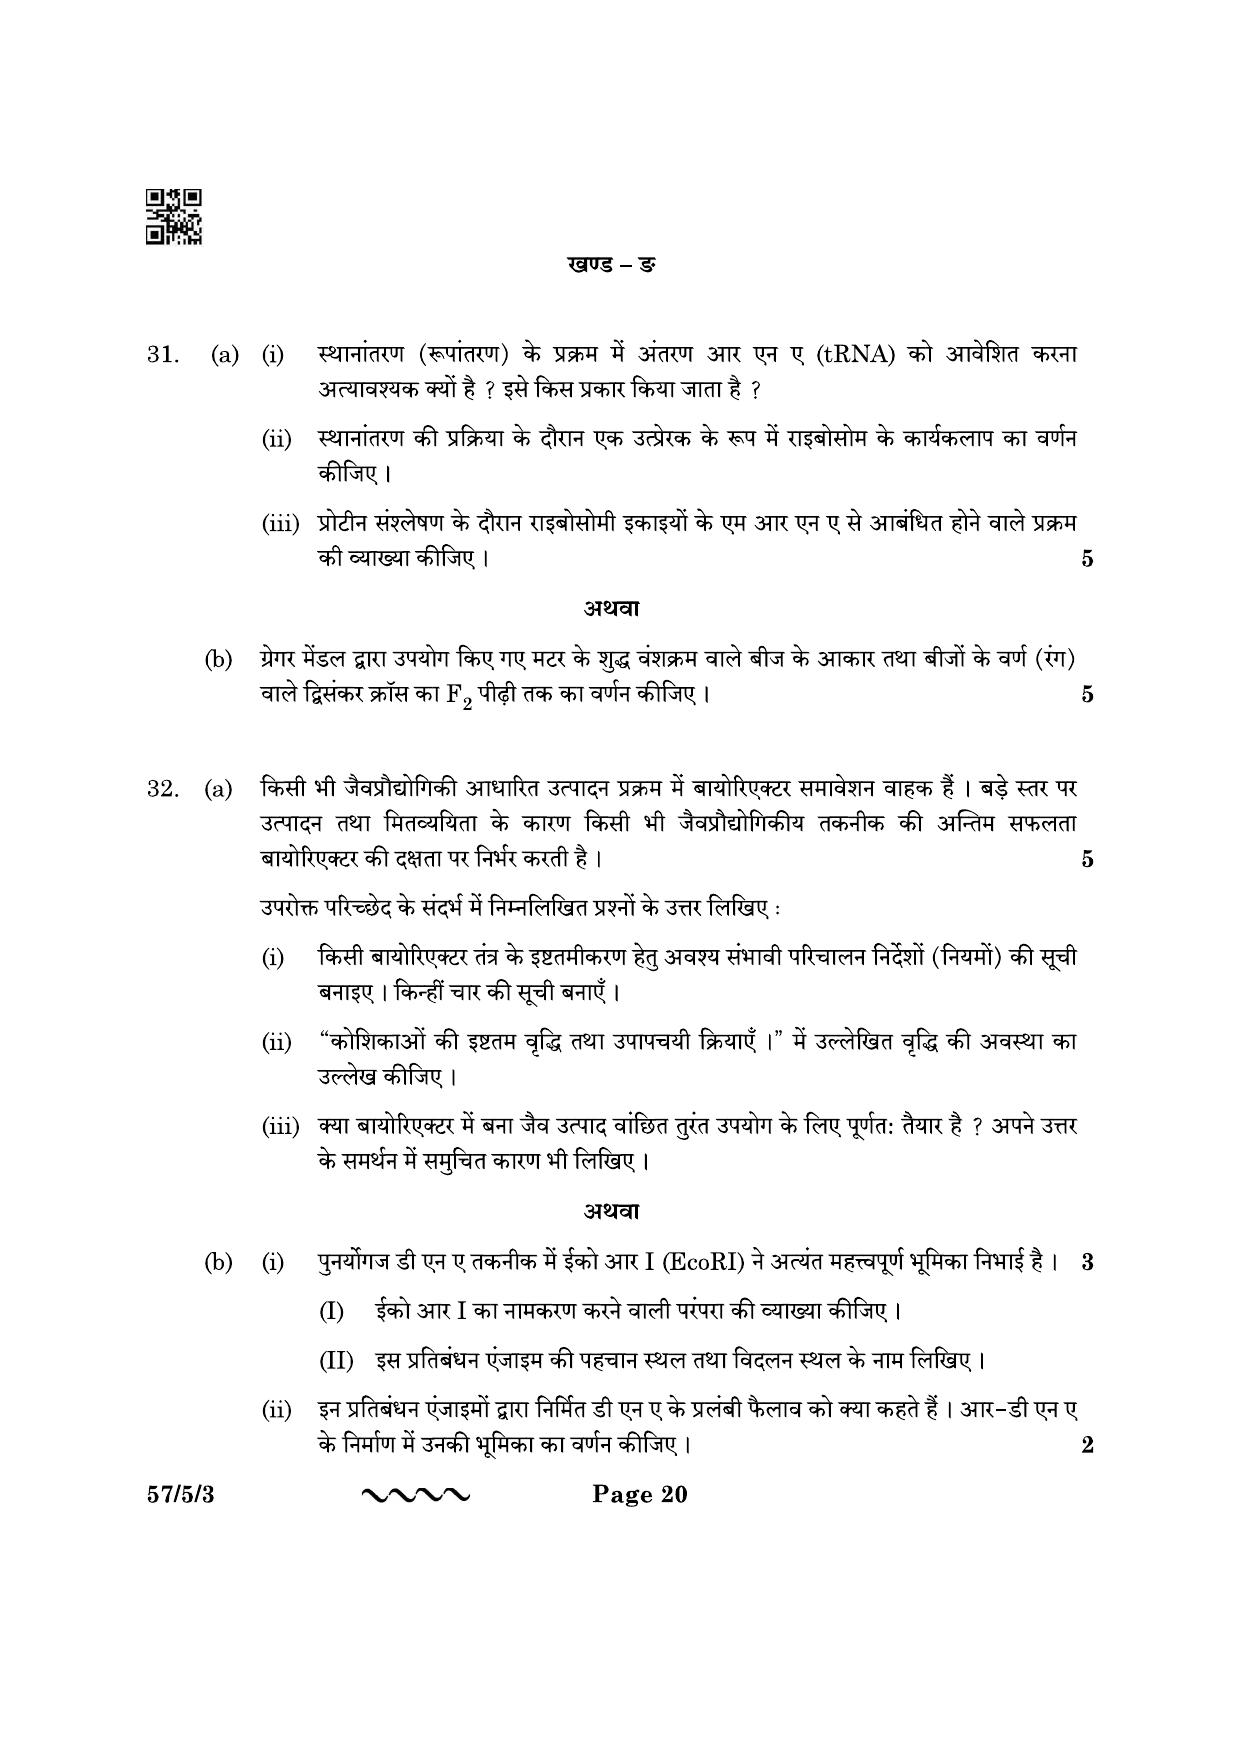 CBSE Class 12 57-5-3 Biology 2023 Question Paper - Page 20